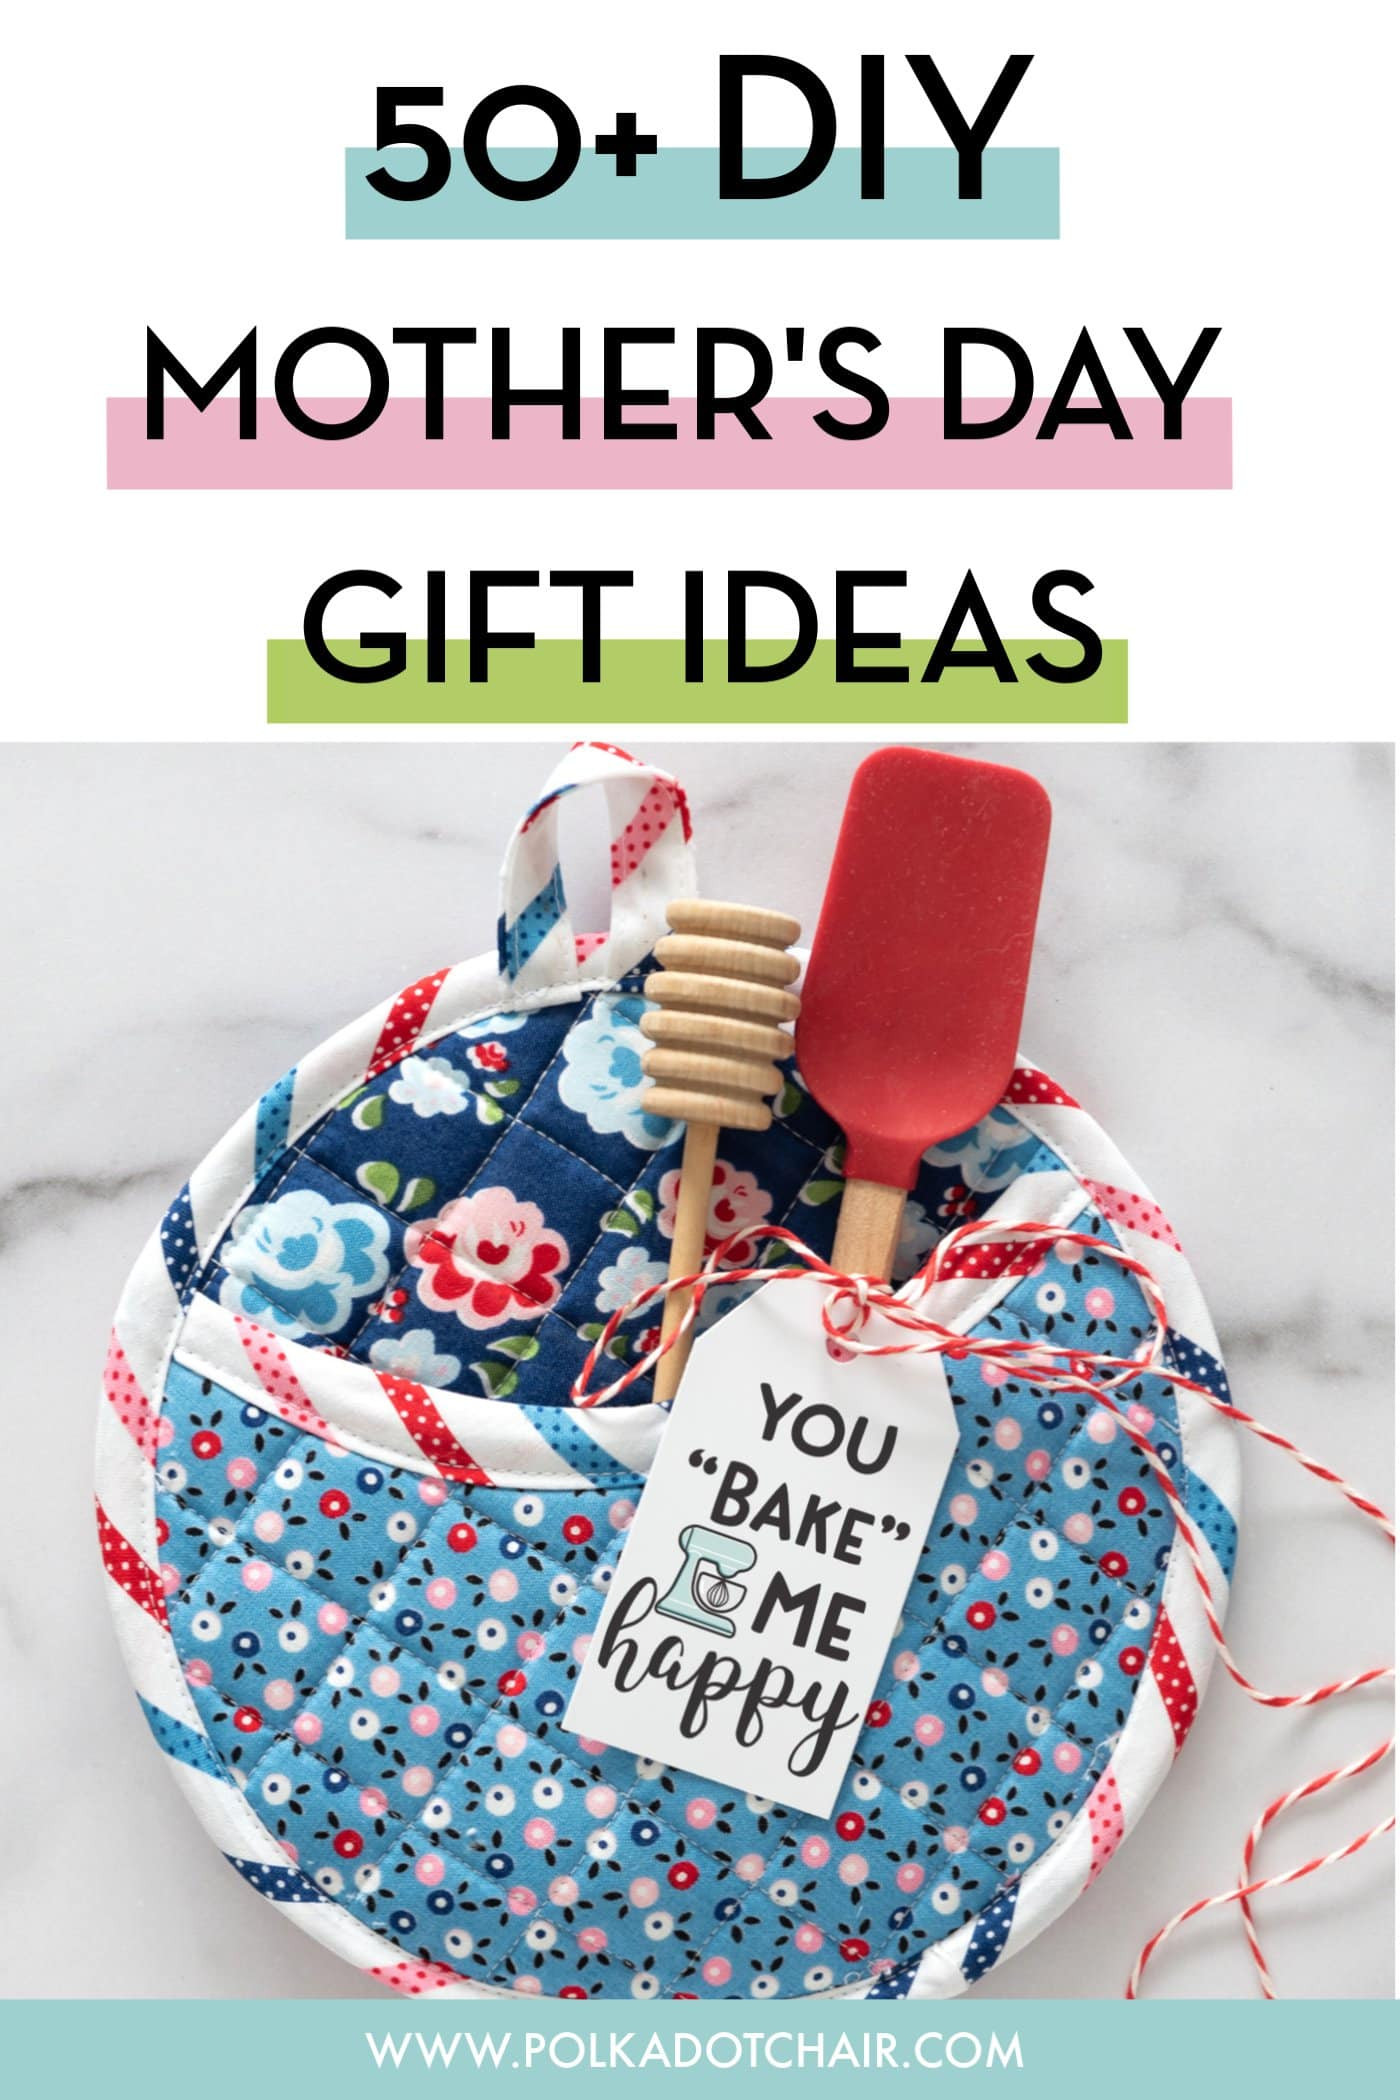 Mothers Day Gift Ideads
 50 DIY Mother s Day Gift Ideas & Projects